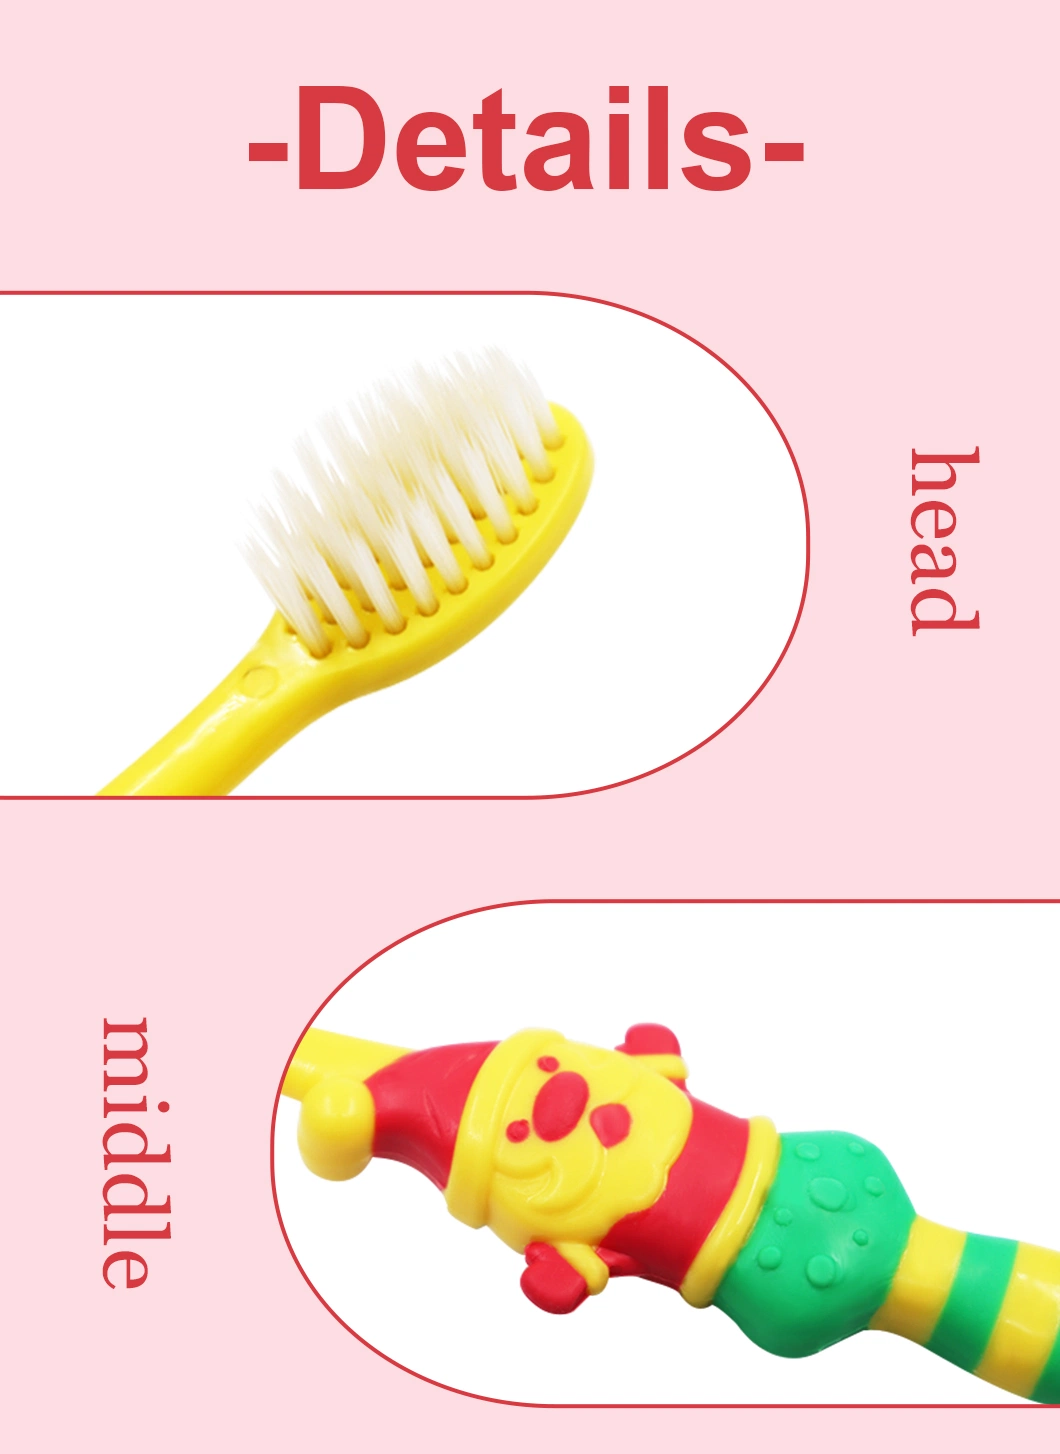 High Quality Small Head Softer Touch Eco Friendly Compostable BPA Free Soft Children&prime;s Toothbrush